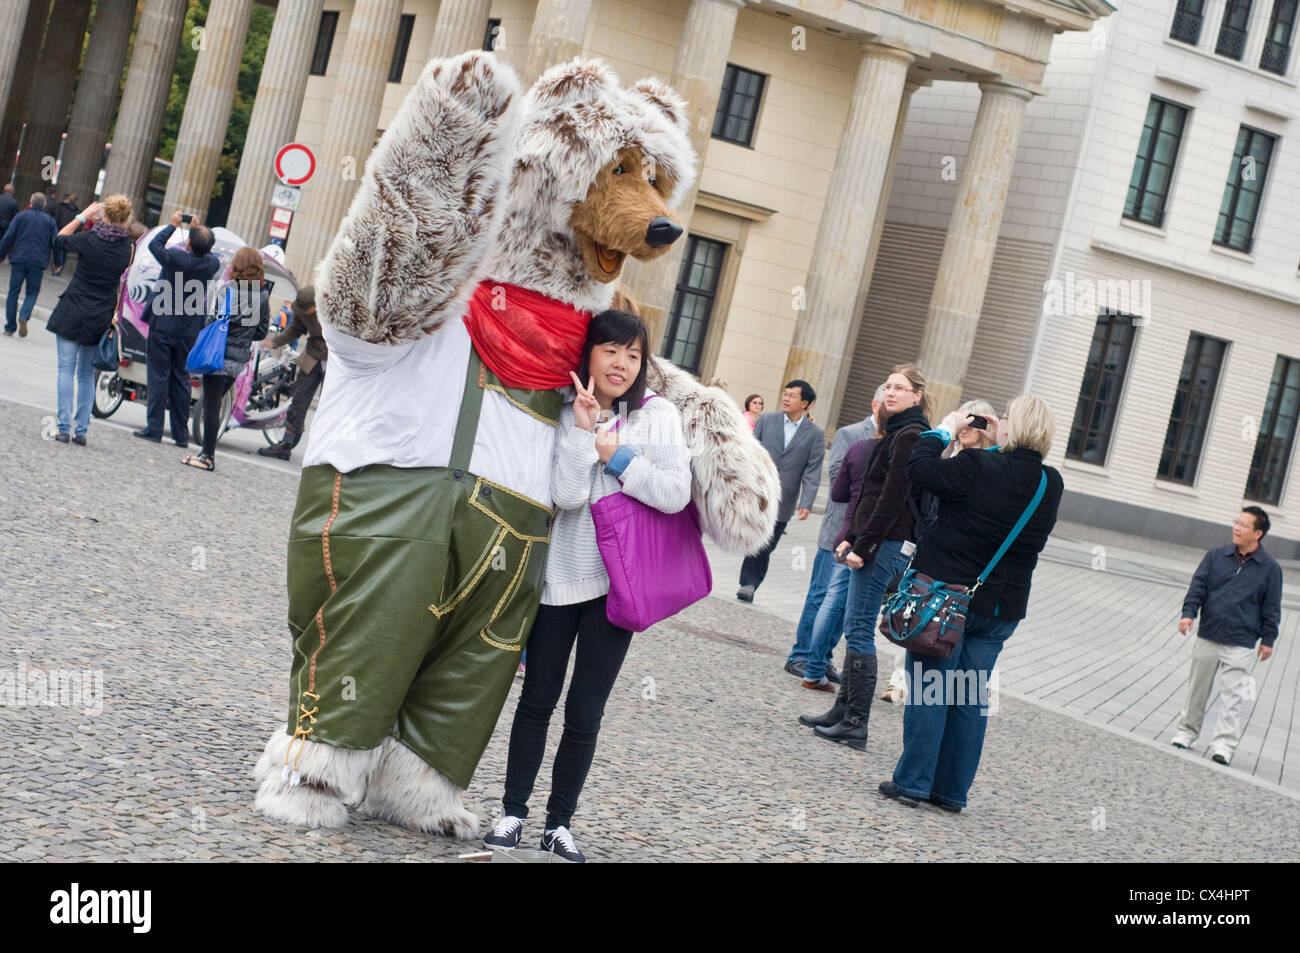 A tourist having her photo taken with someone dressed as bear in front of the Brandenburg Gate in Berlin, Germany Stock Photo